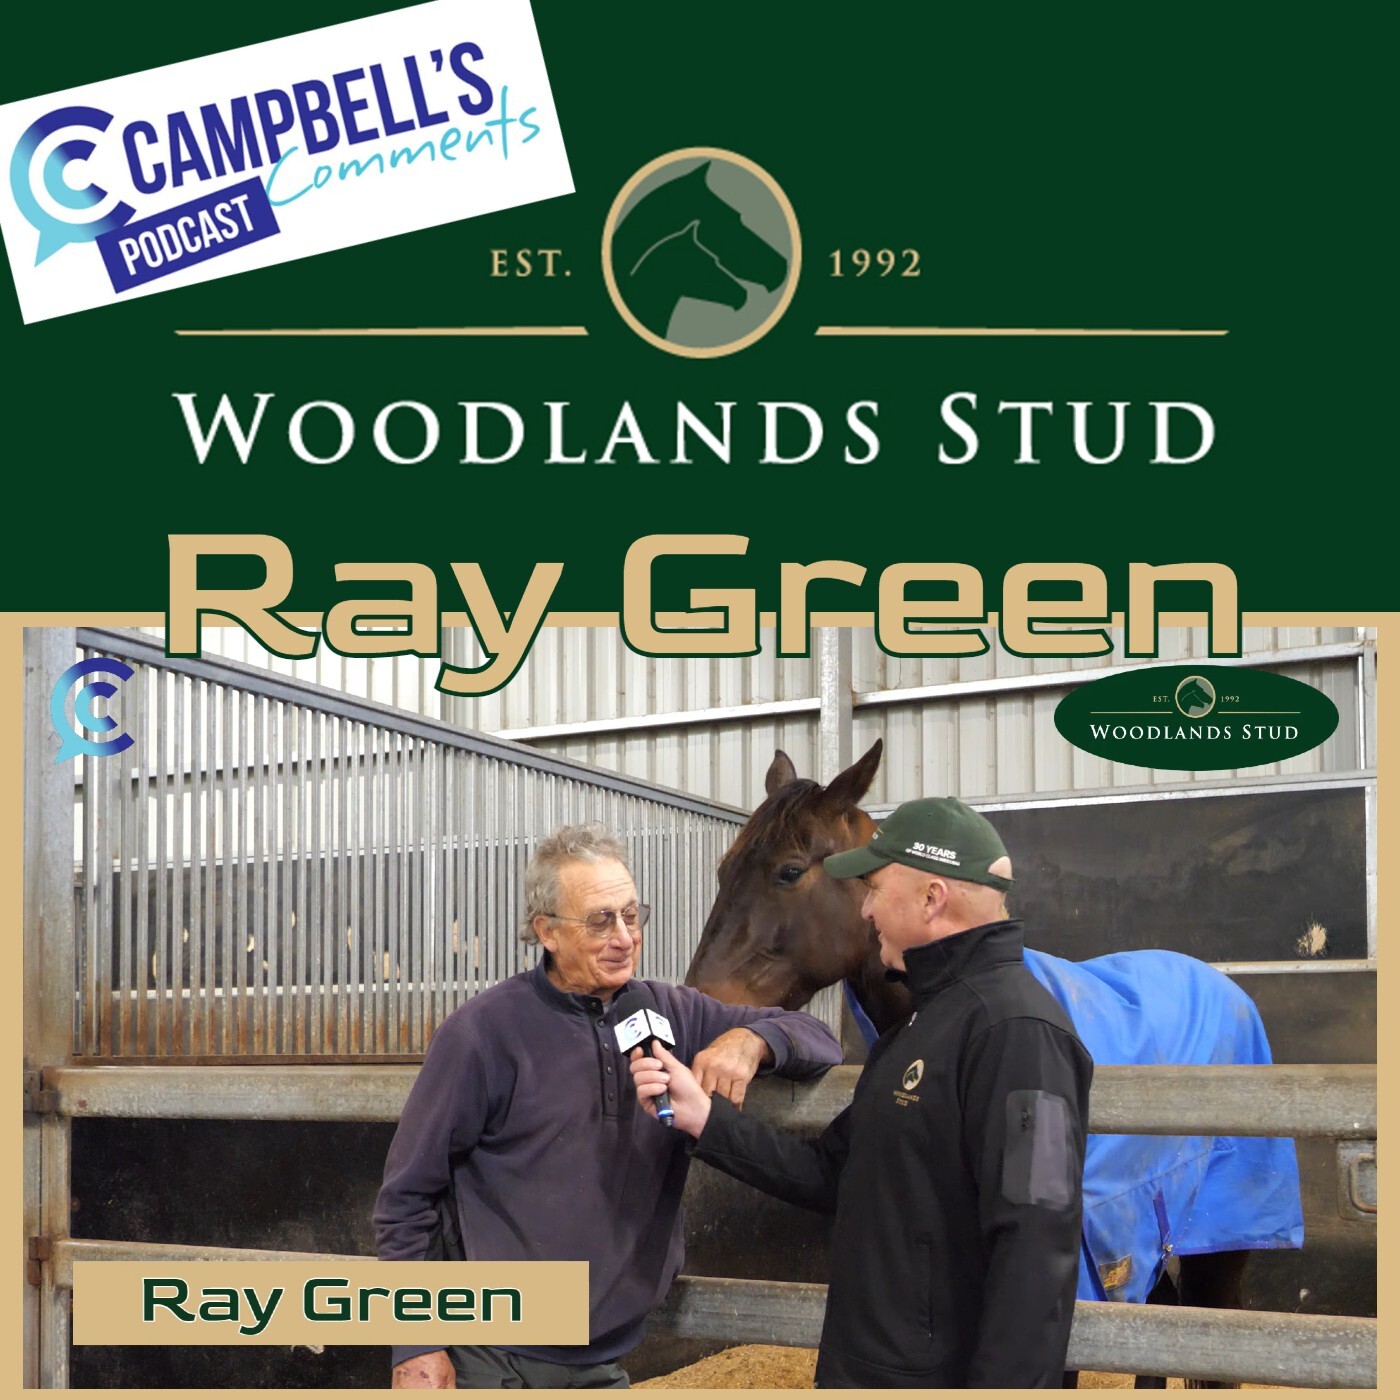 You are currently viewing 205: Campbells Comments with Ray Green